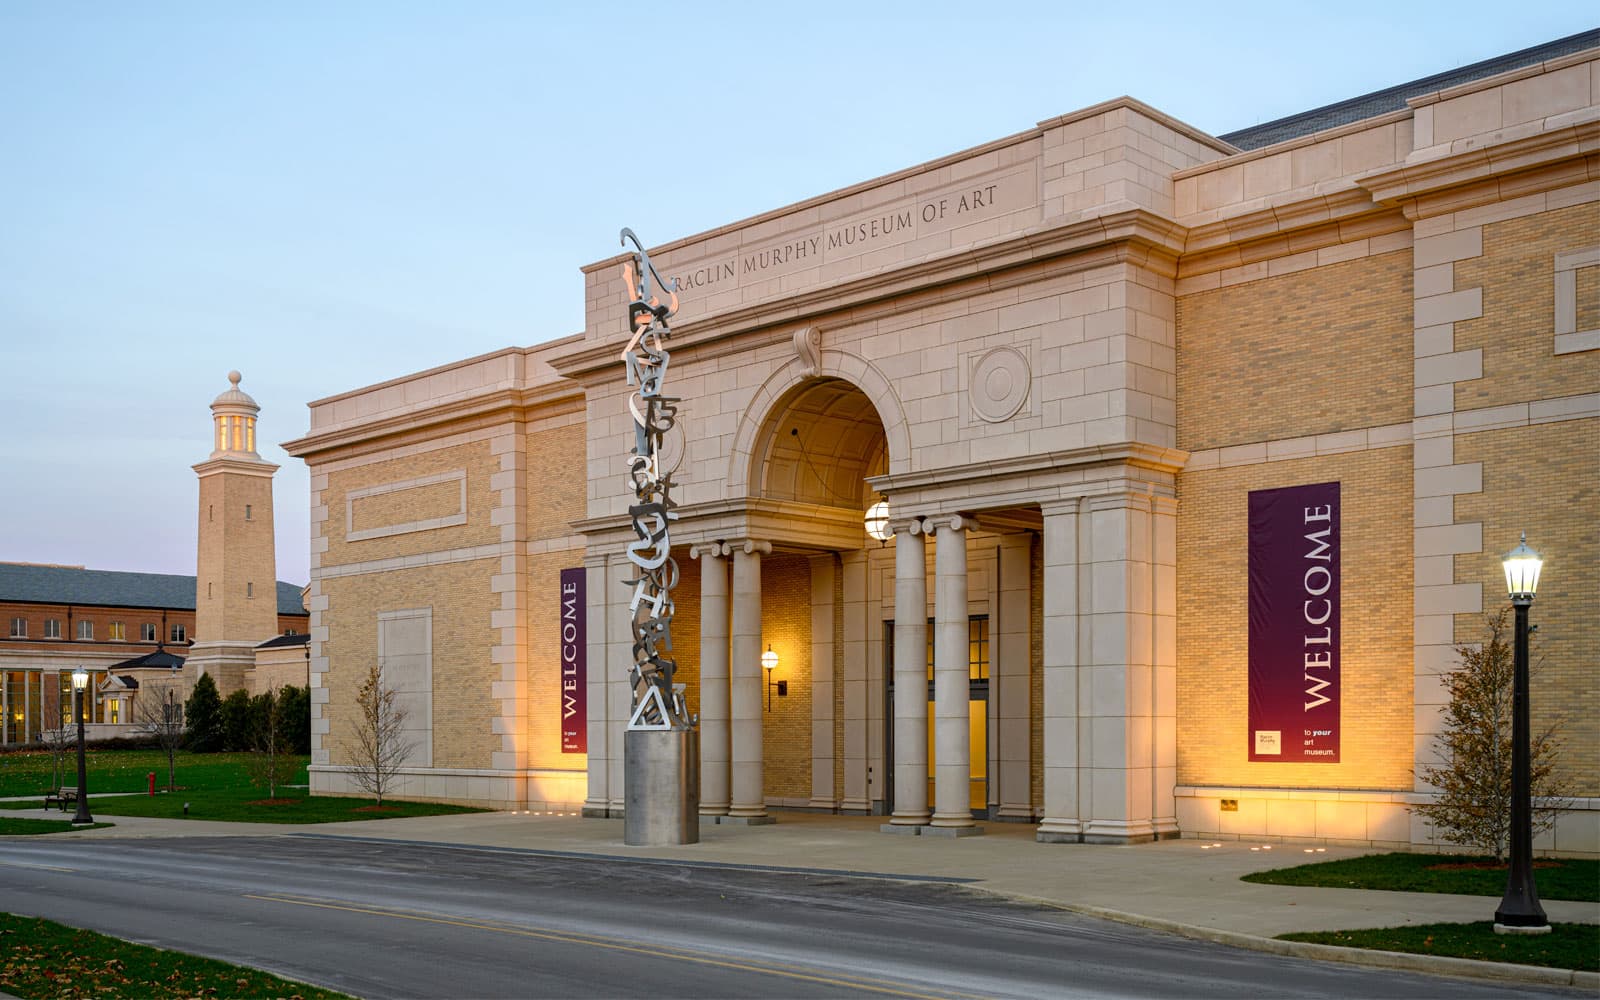 In the Galleries: Experience the Raclin Murphy Museum of Art